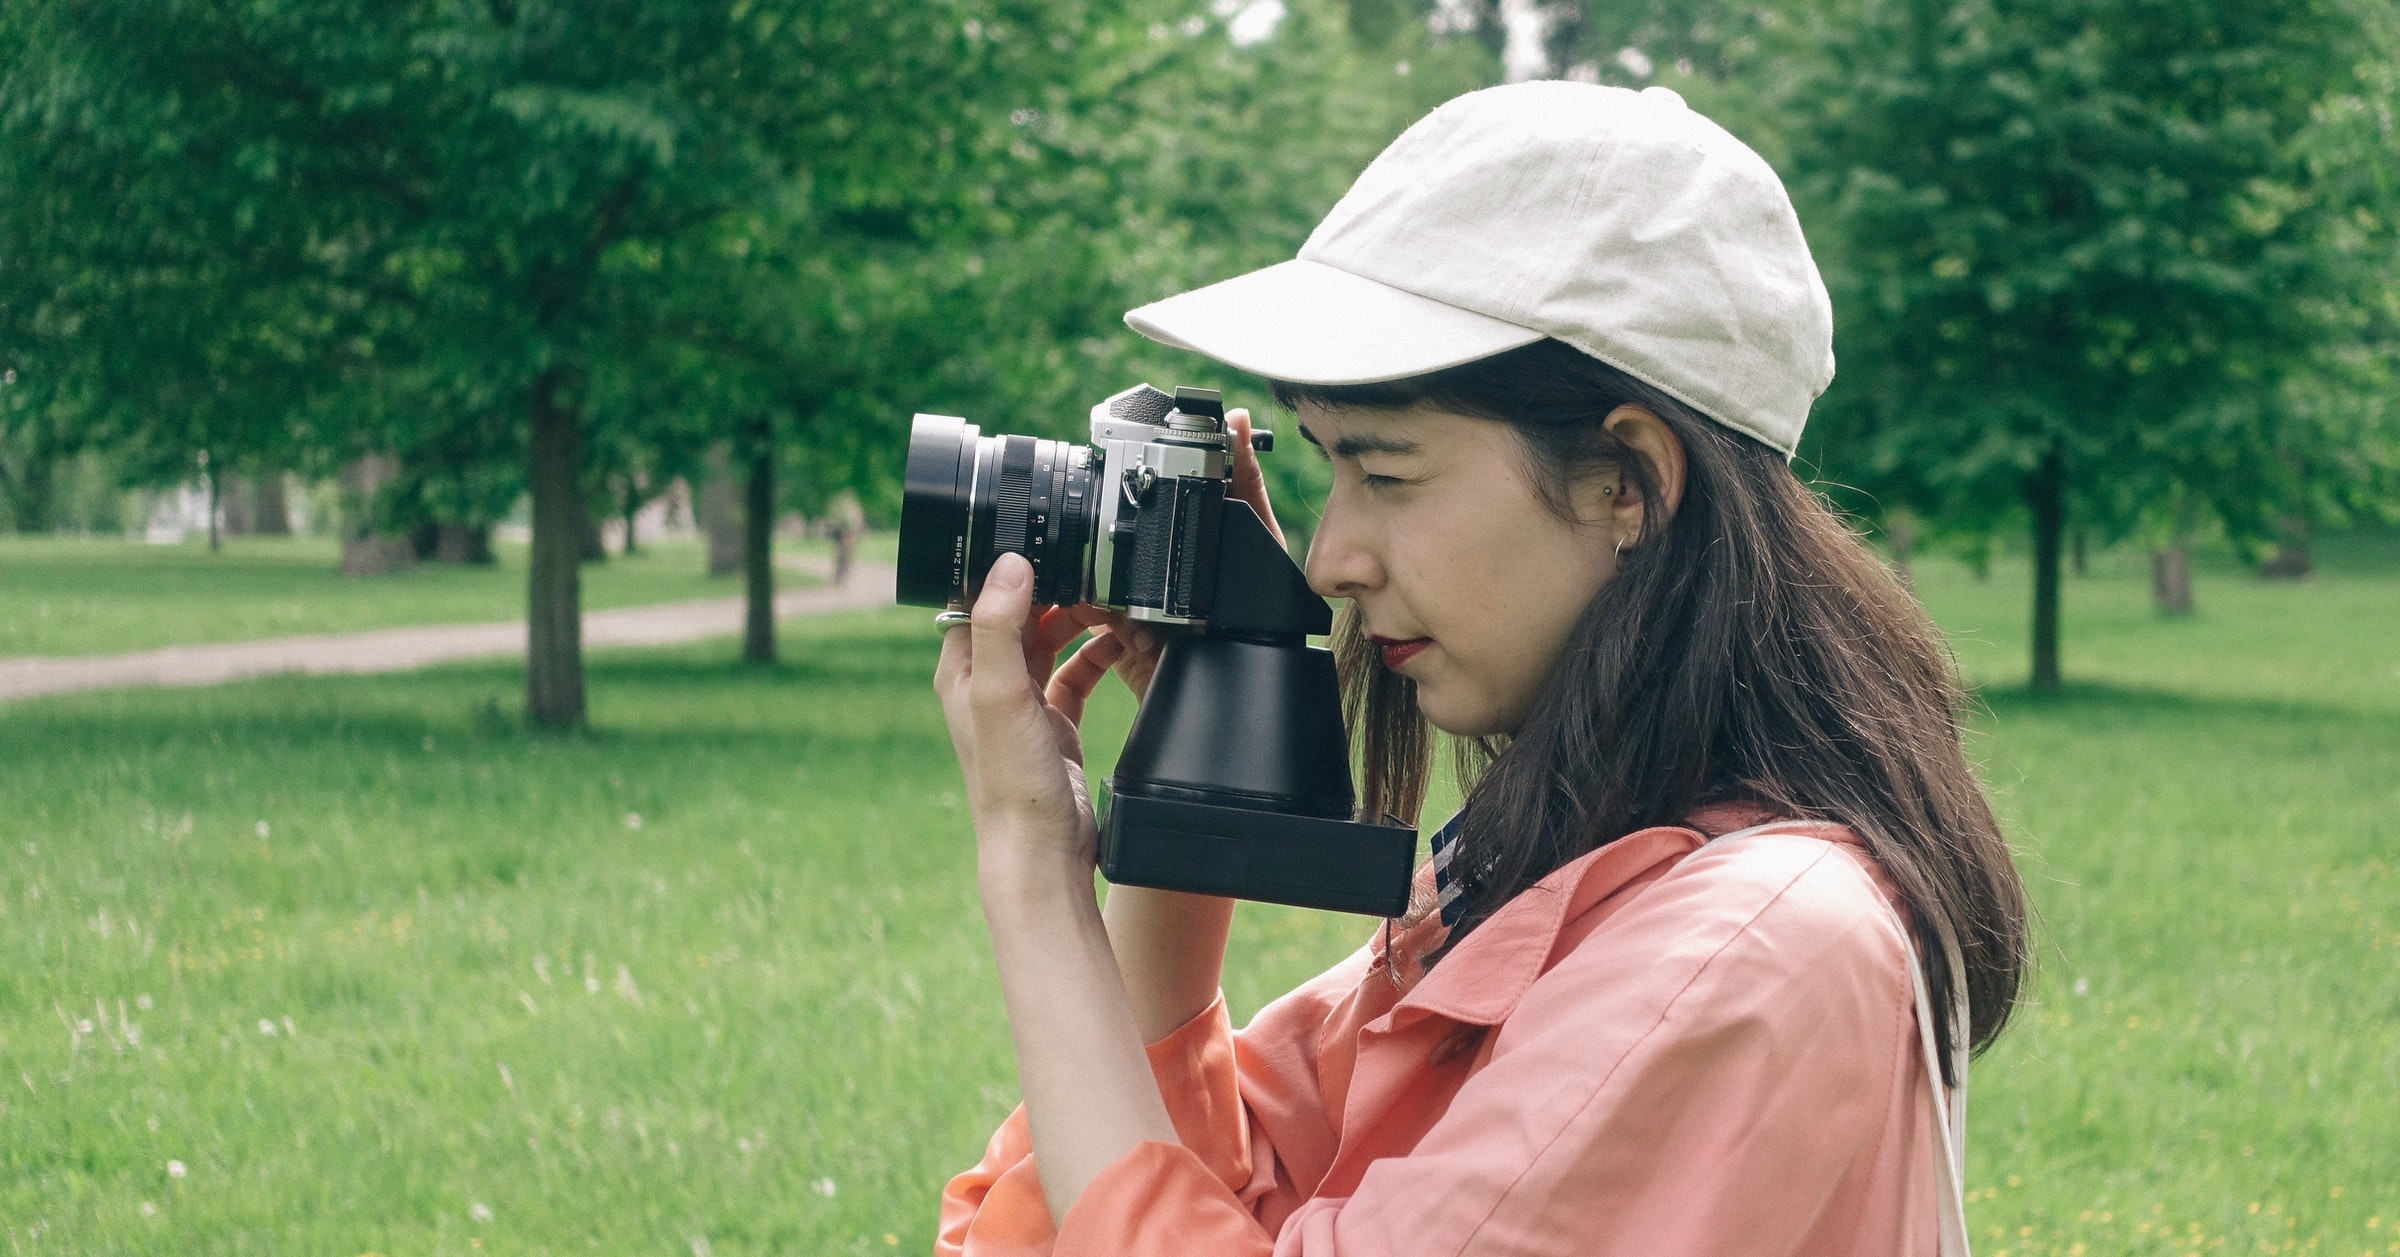 Photography, Photograph, Lawn, Girl, , Tree, Photograph, Photograph, photograph, photograph, green, grass, photography, tree, girl, photographer, plant, lawn, headgear